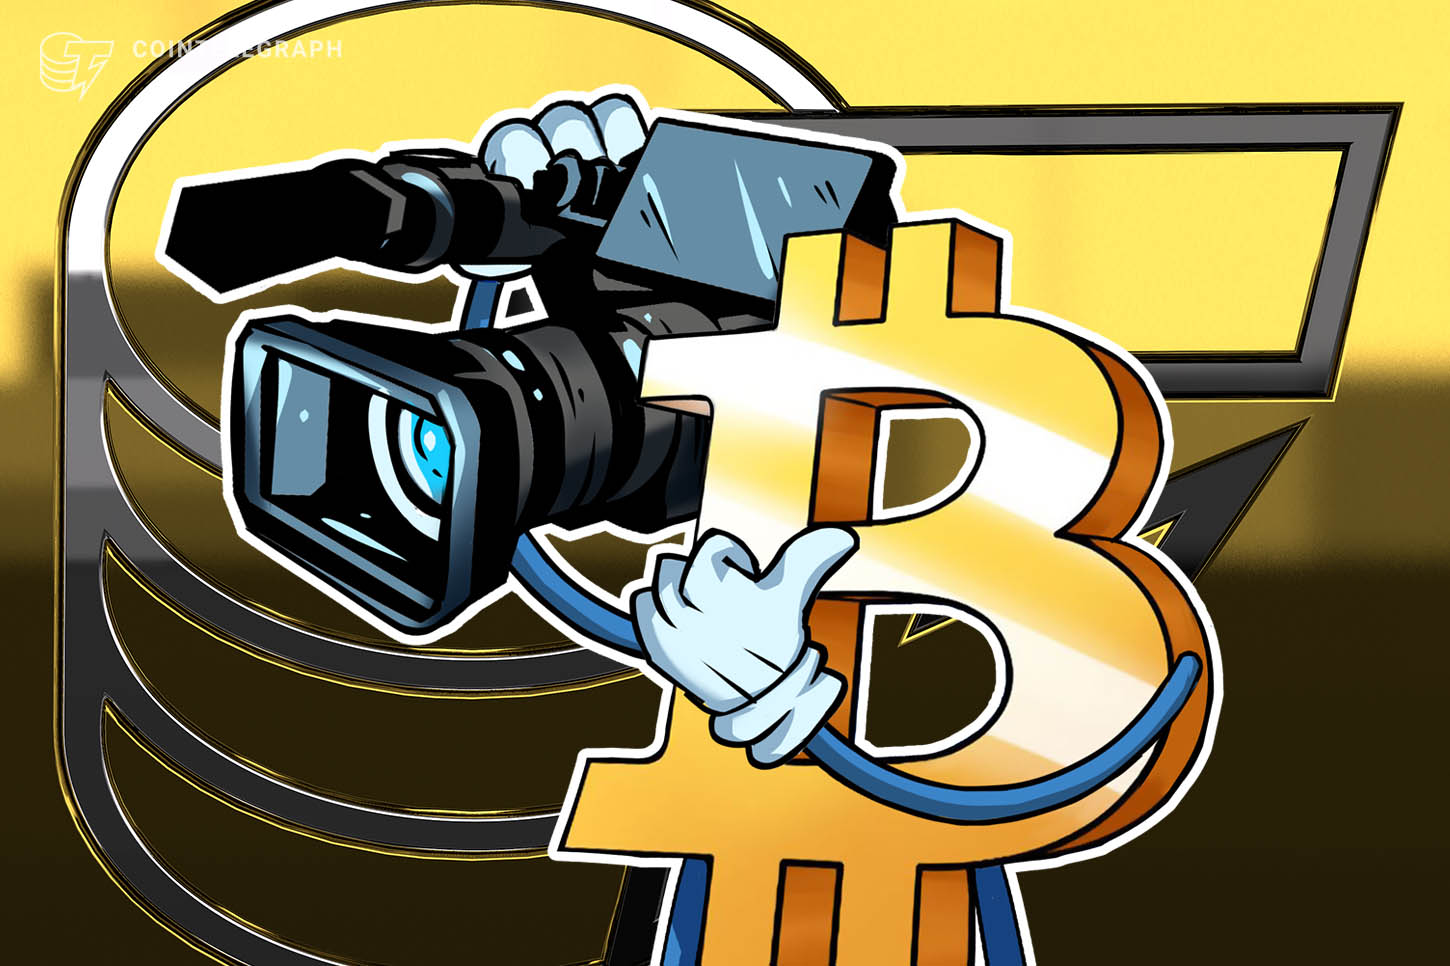 Institutional cash might propel Bitcoin to $250Ok in a single yr’s time, says macro investor